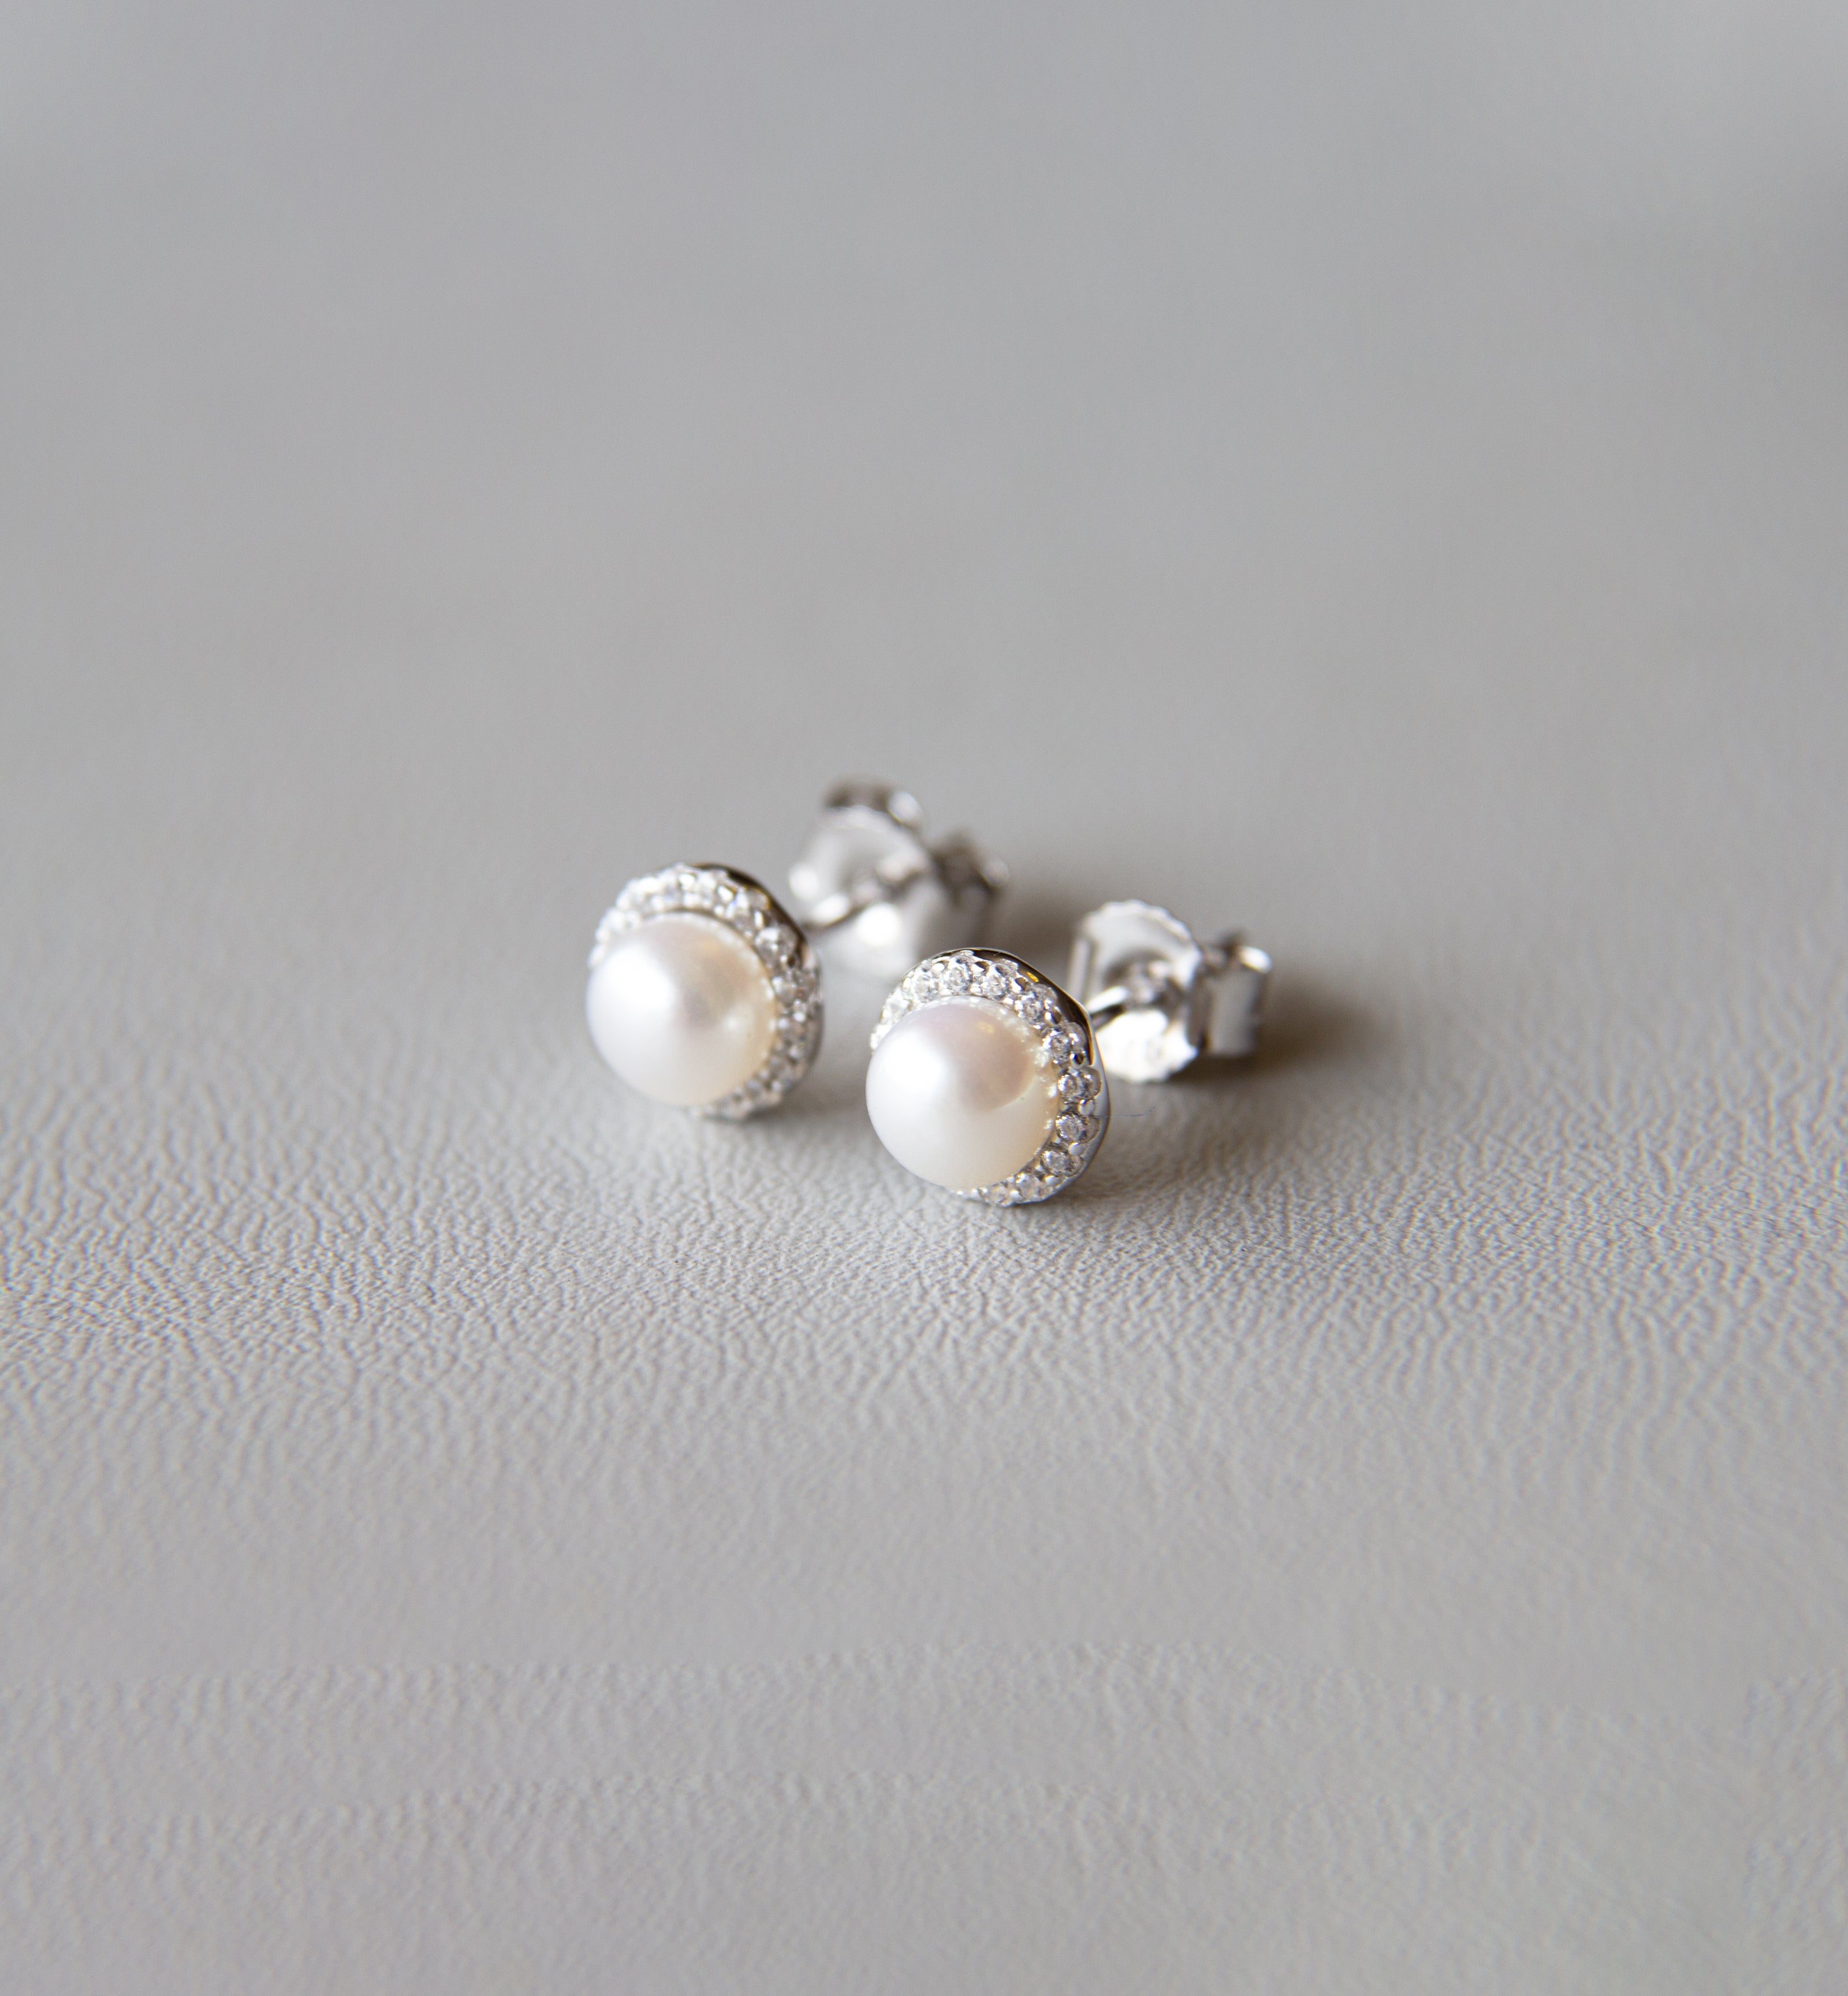 Silver 925 Pearl Earrings with Cubic Zircon Stones